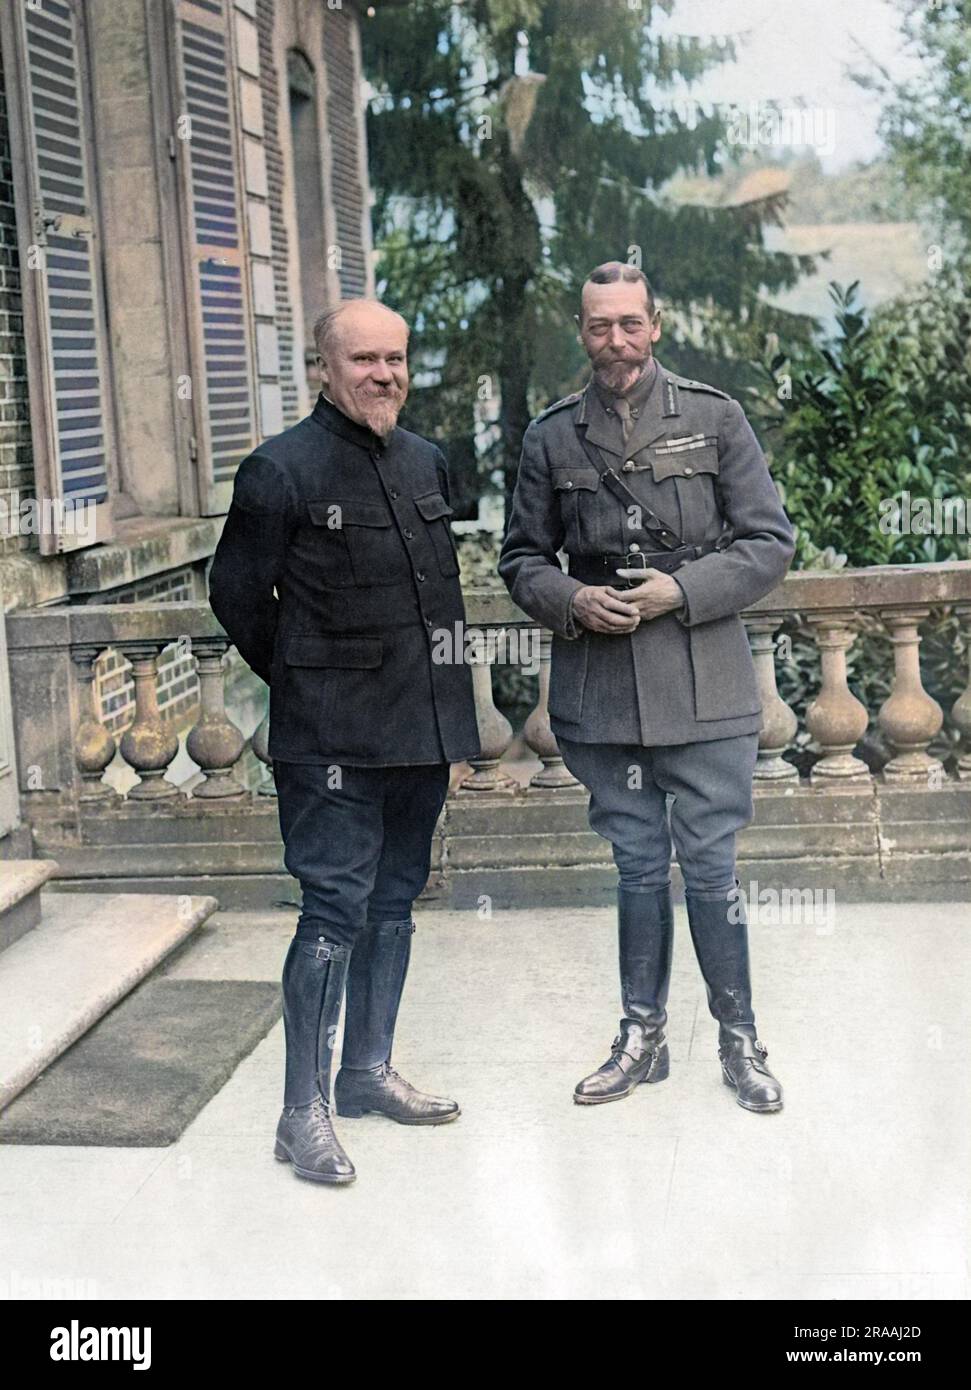 King George V and President Poincare of France near the Western Front in France during World War One.     Date: circa 1918 Stock Photo